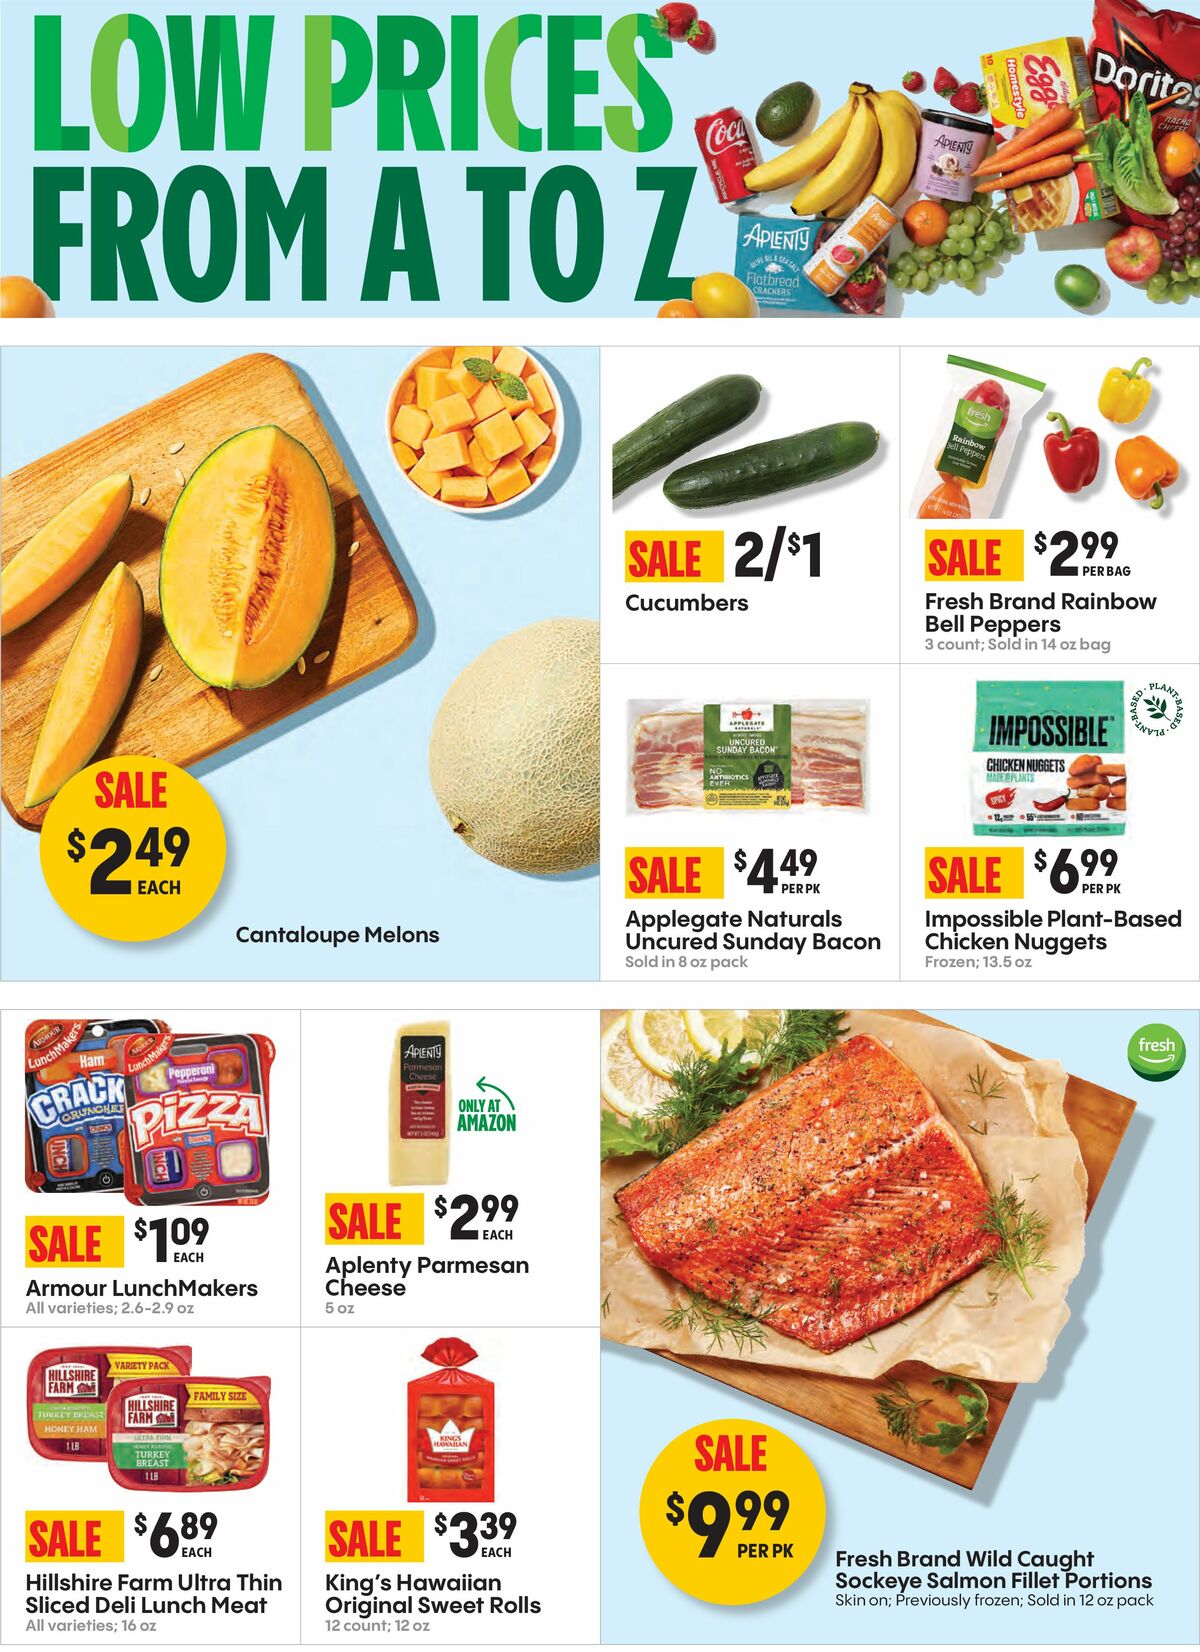 Amazon Fresh Weekly Ad from September 27